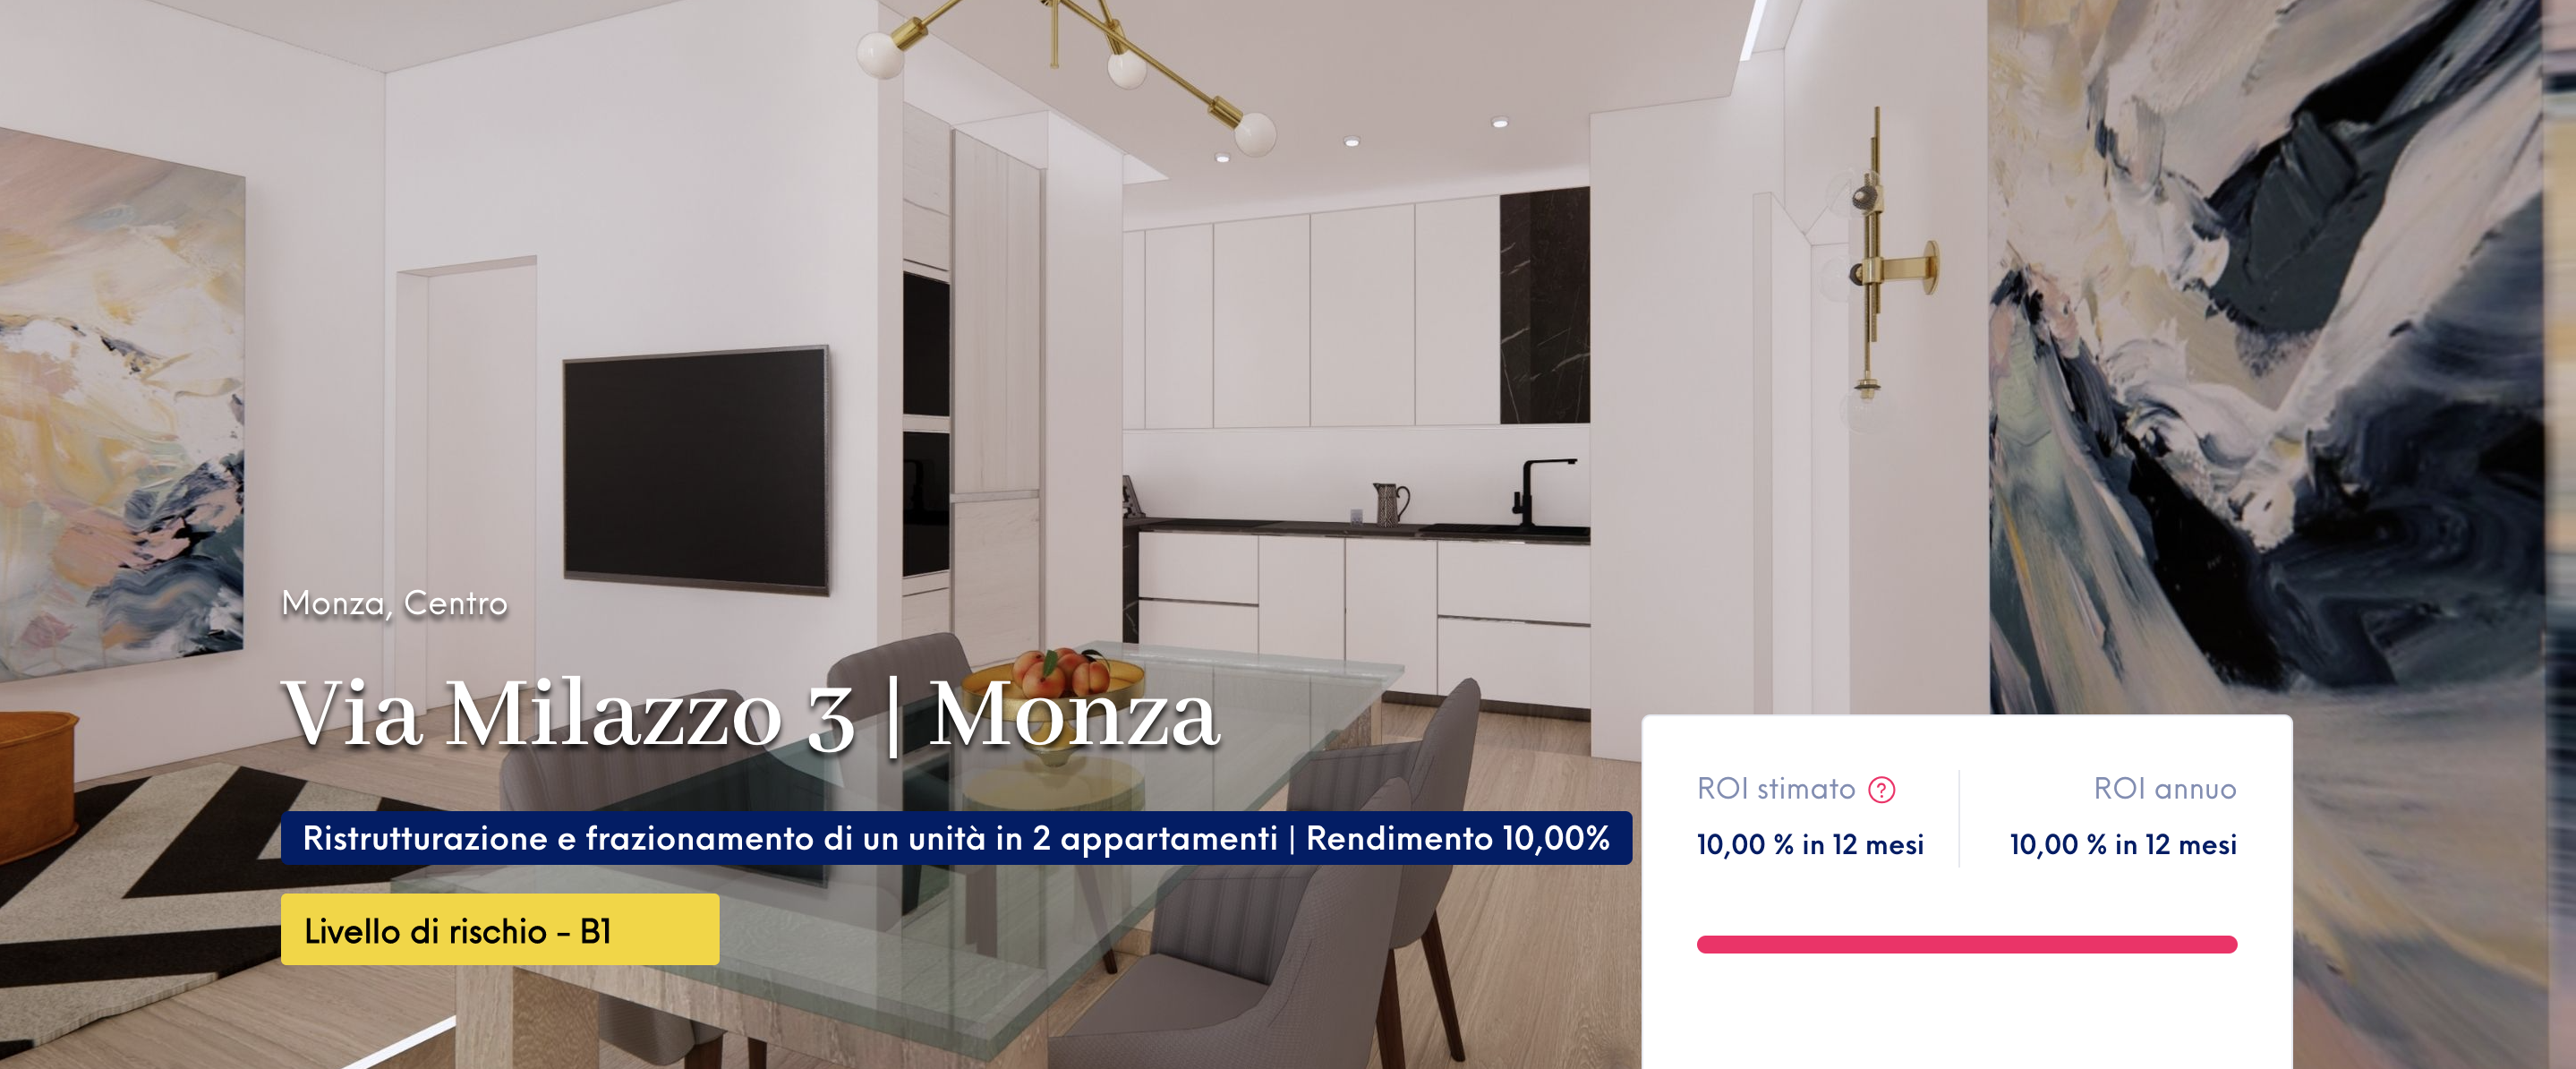 Airhome Invest Campagna Crowdfunding Monza